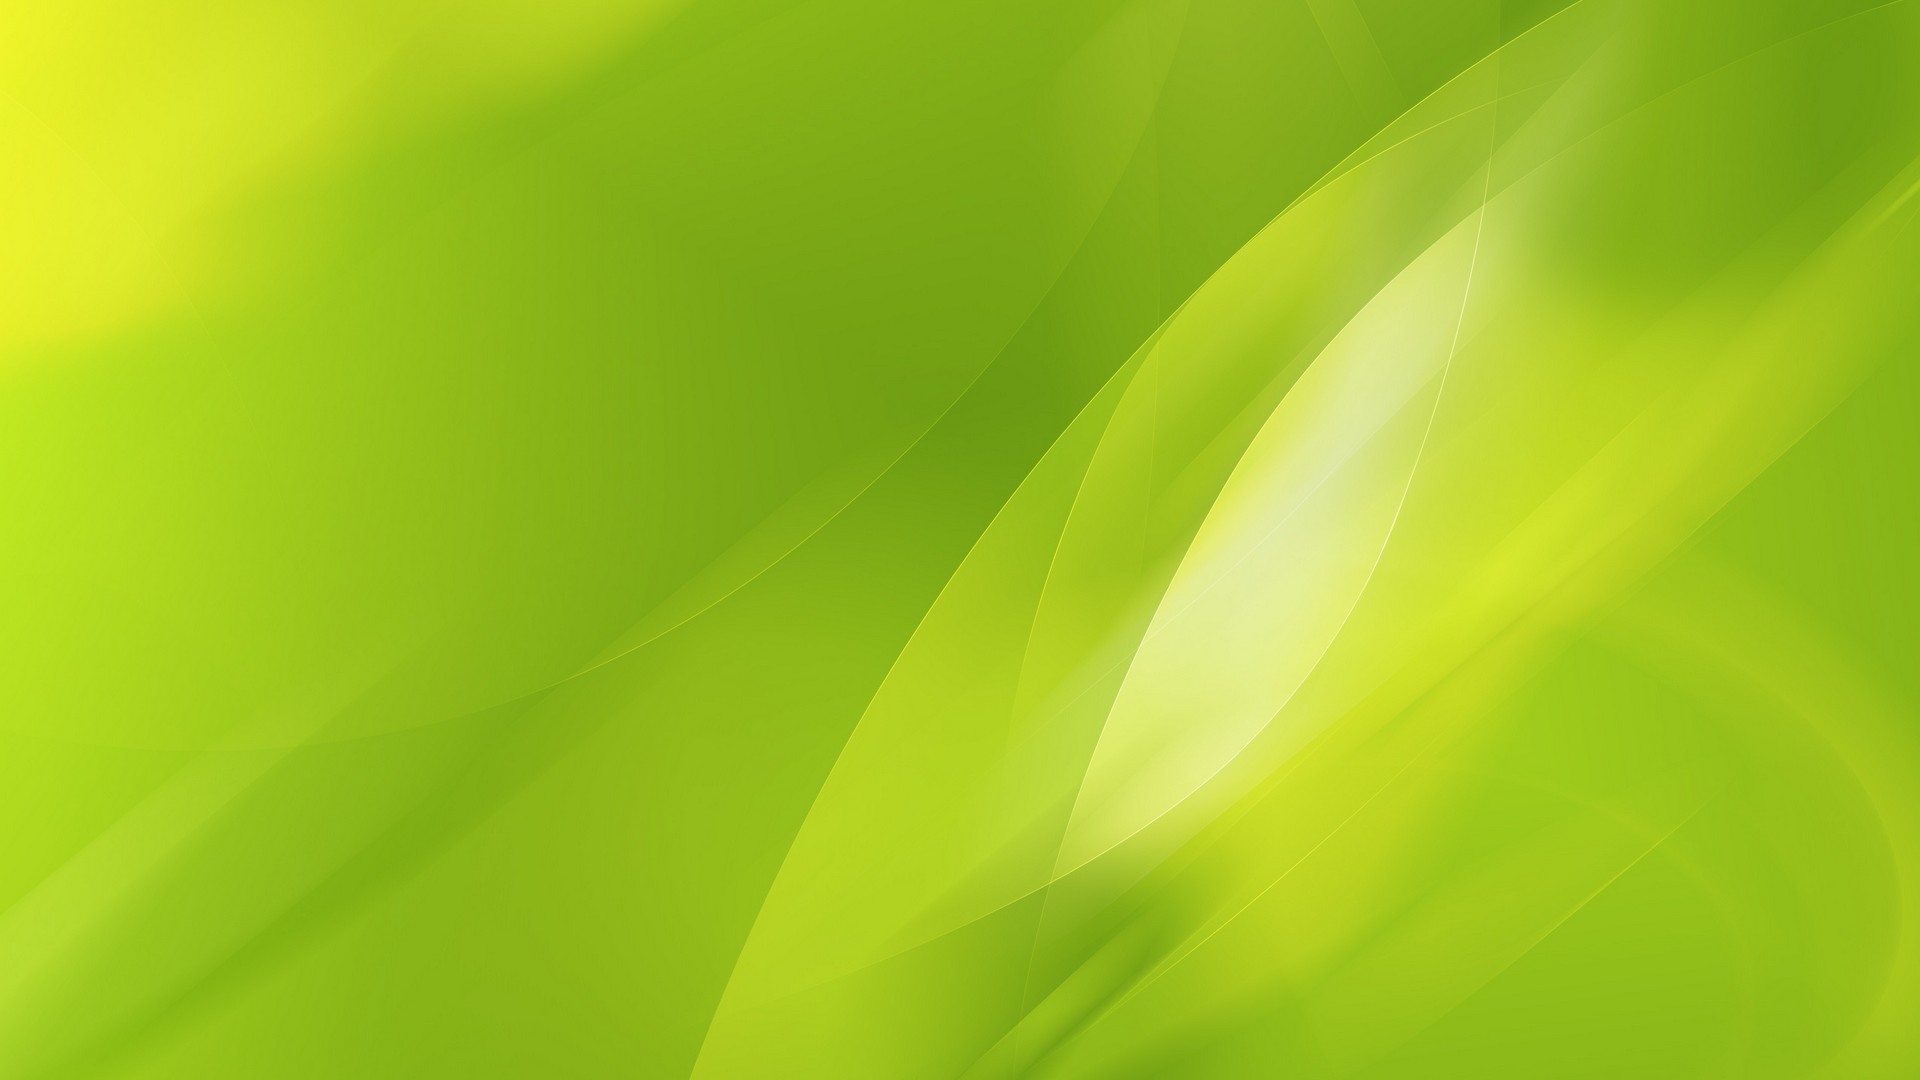 Wallpapers Computer Lime Green with image resolution 1920x1080 pixel. You can make this wallpaper for your Desktop Computer Backgrounds, Mac Wallpapers, Android Lock screen or iPhone Screensavers